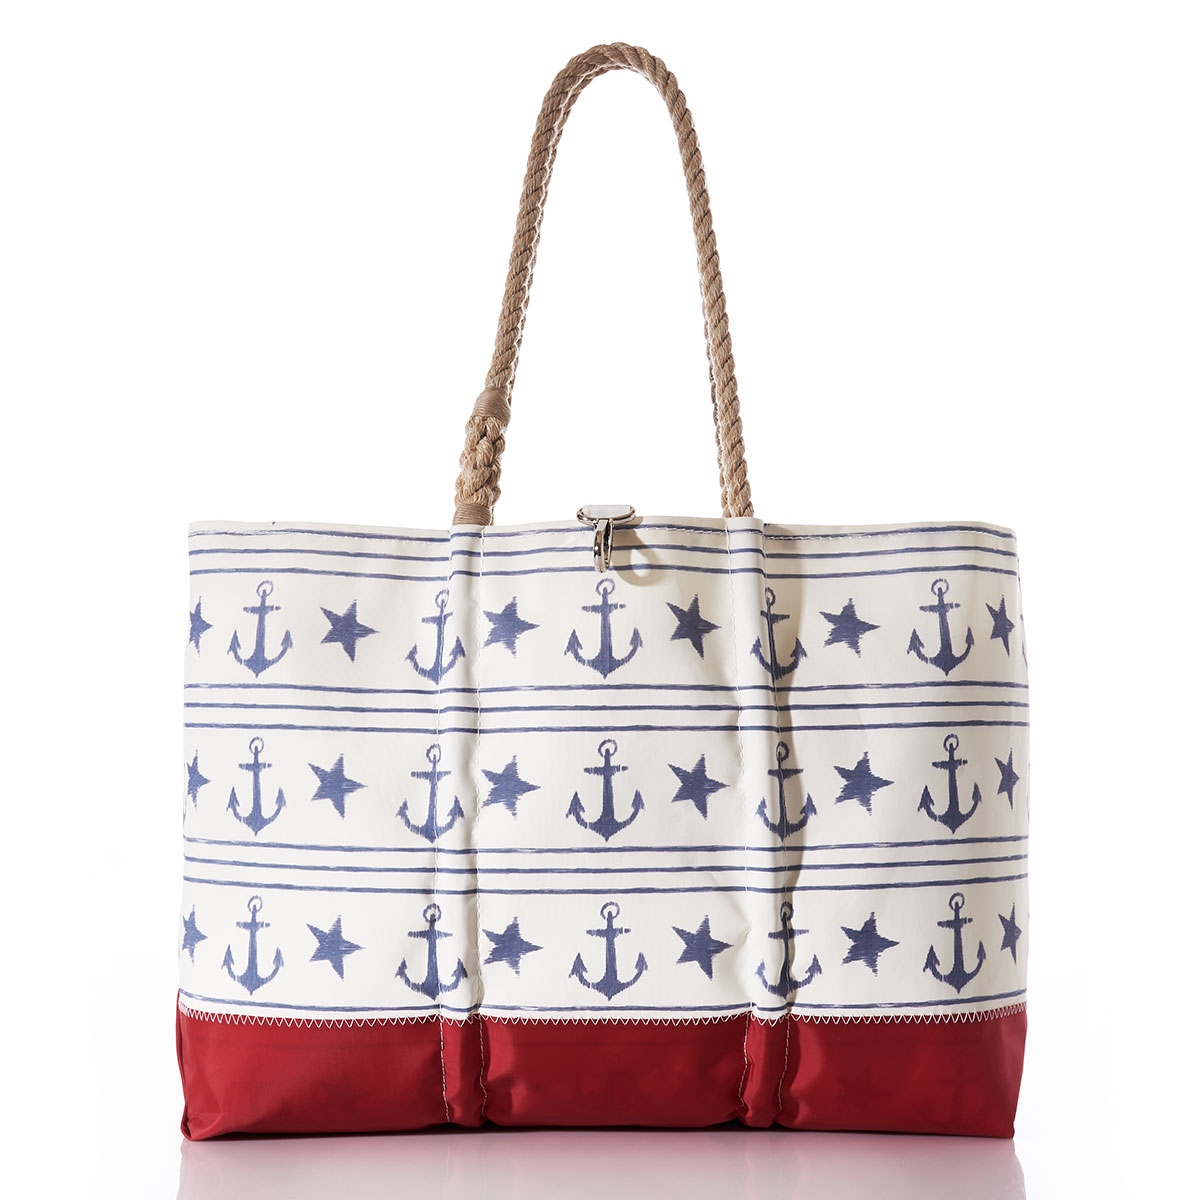 blue anchors stars and stripes line this recycled sail cloth tote with a red bottom and hemp rope handles